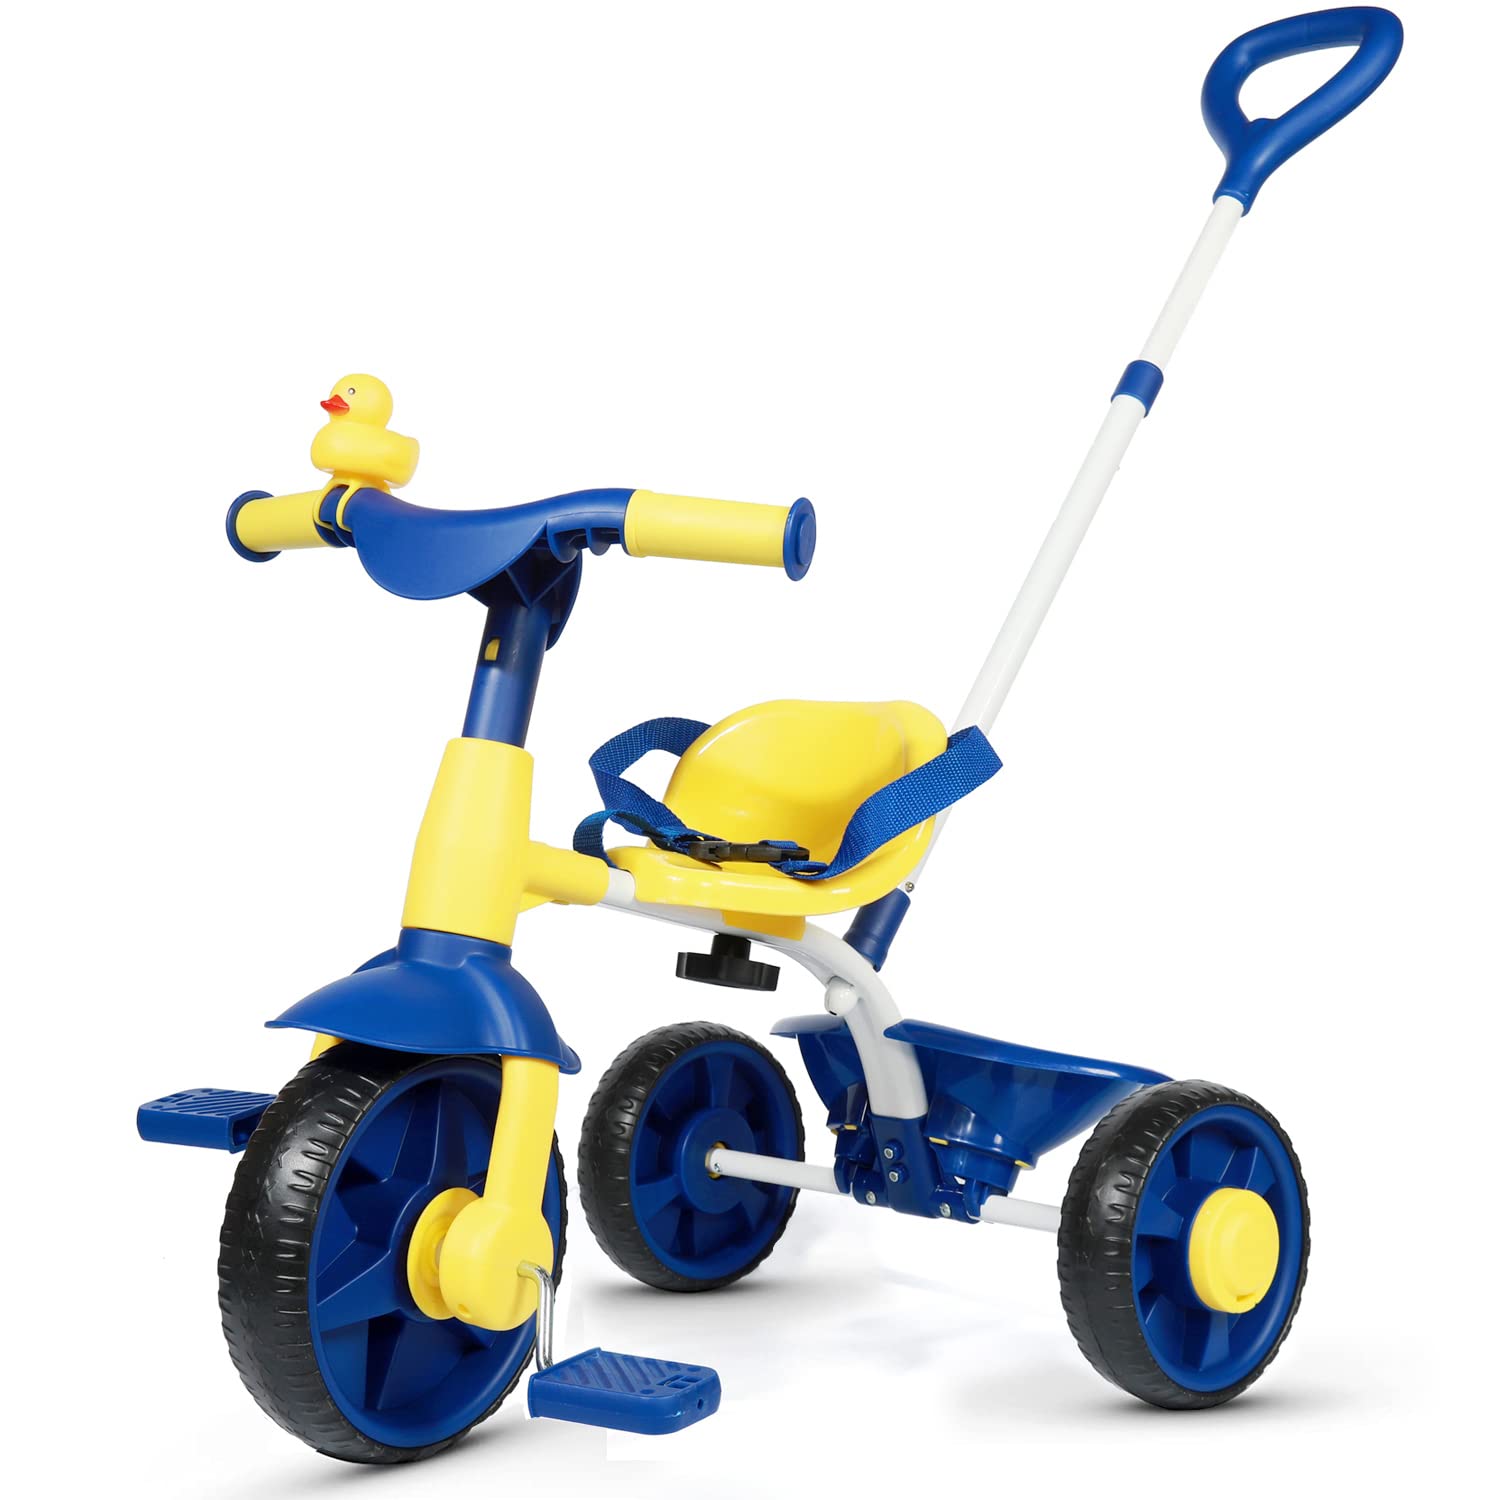 KRIDDO 2 in 1 Kids Tricycles Age 18 Month to 3 Years, Gift Toddler Trikes for Toddlers with Push Handle and Duck Bell, Blue